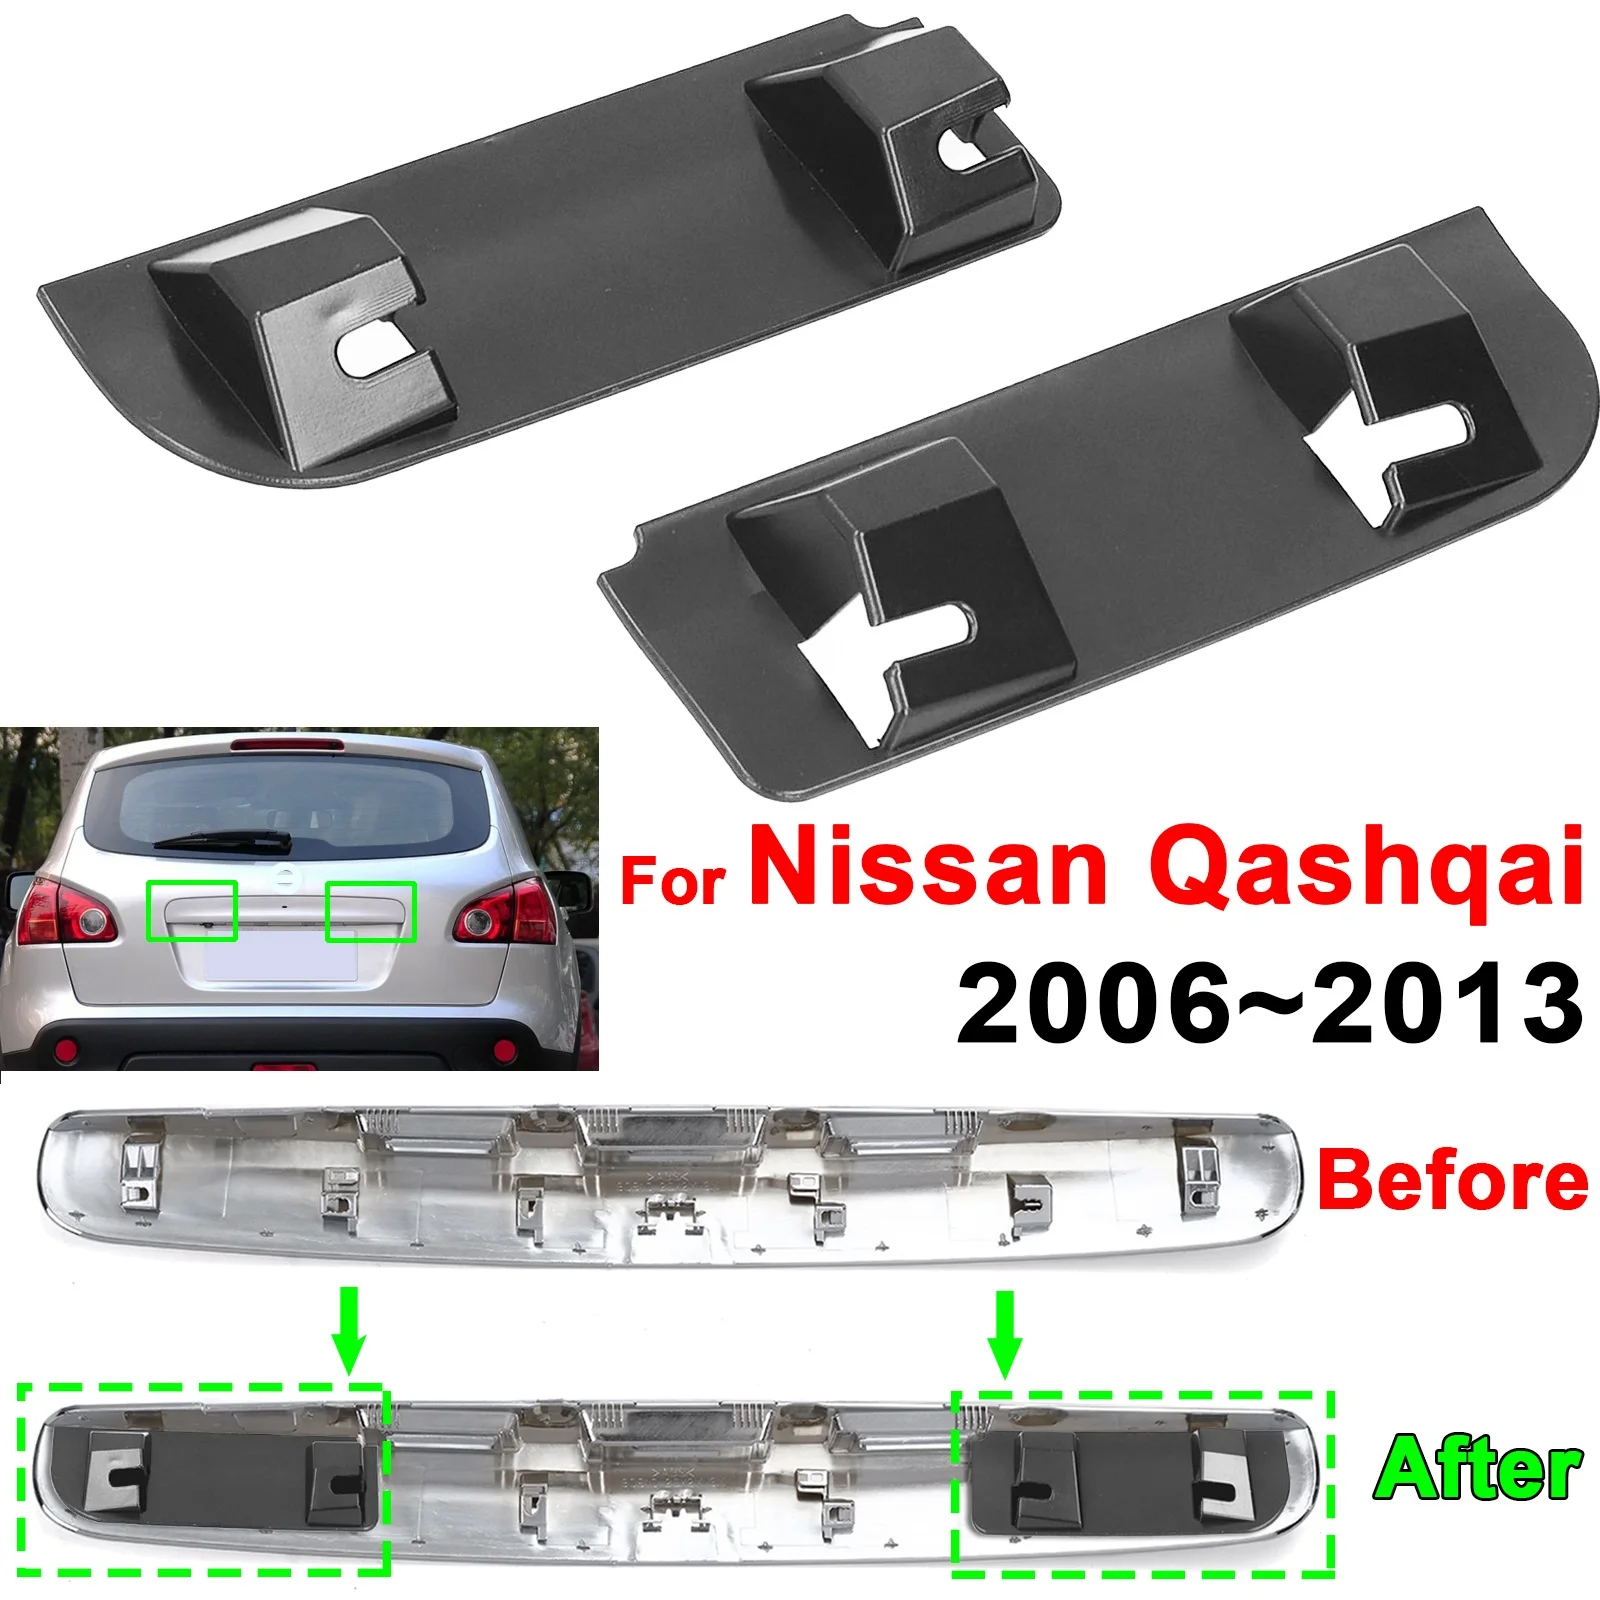 

Car Tailgate Boot Handle Repair Snapped Clip Kit Clips 2006 2007 2008 2009 -2013 90812JD20H 90812JD30H For Nissan Qashqai Dualis